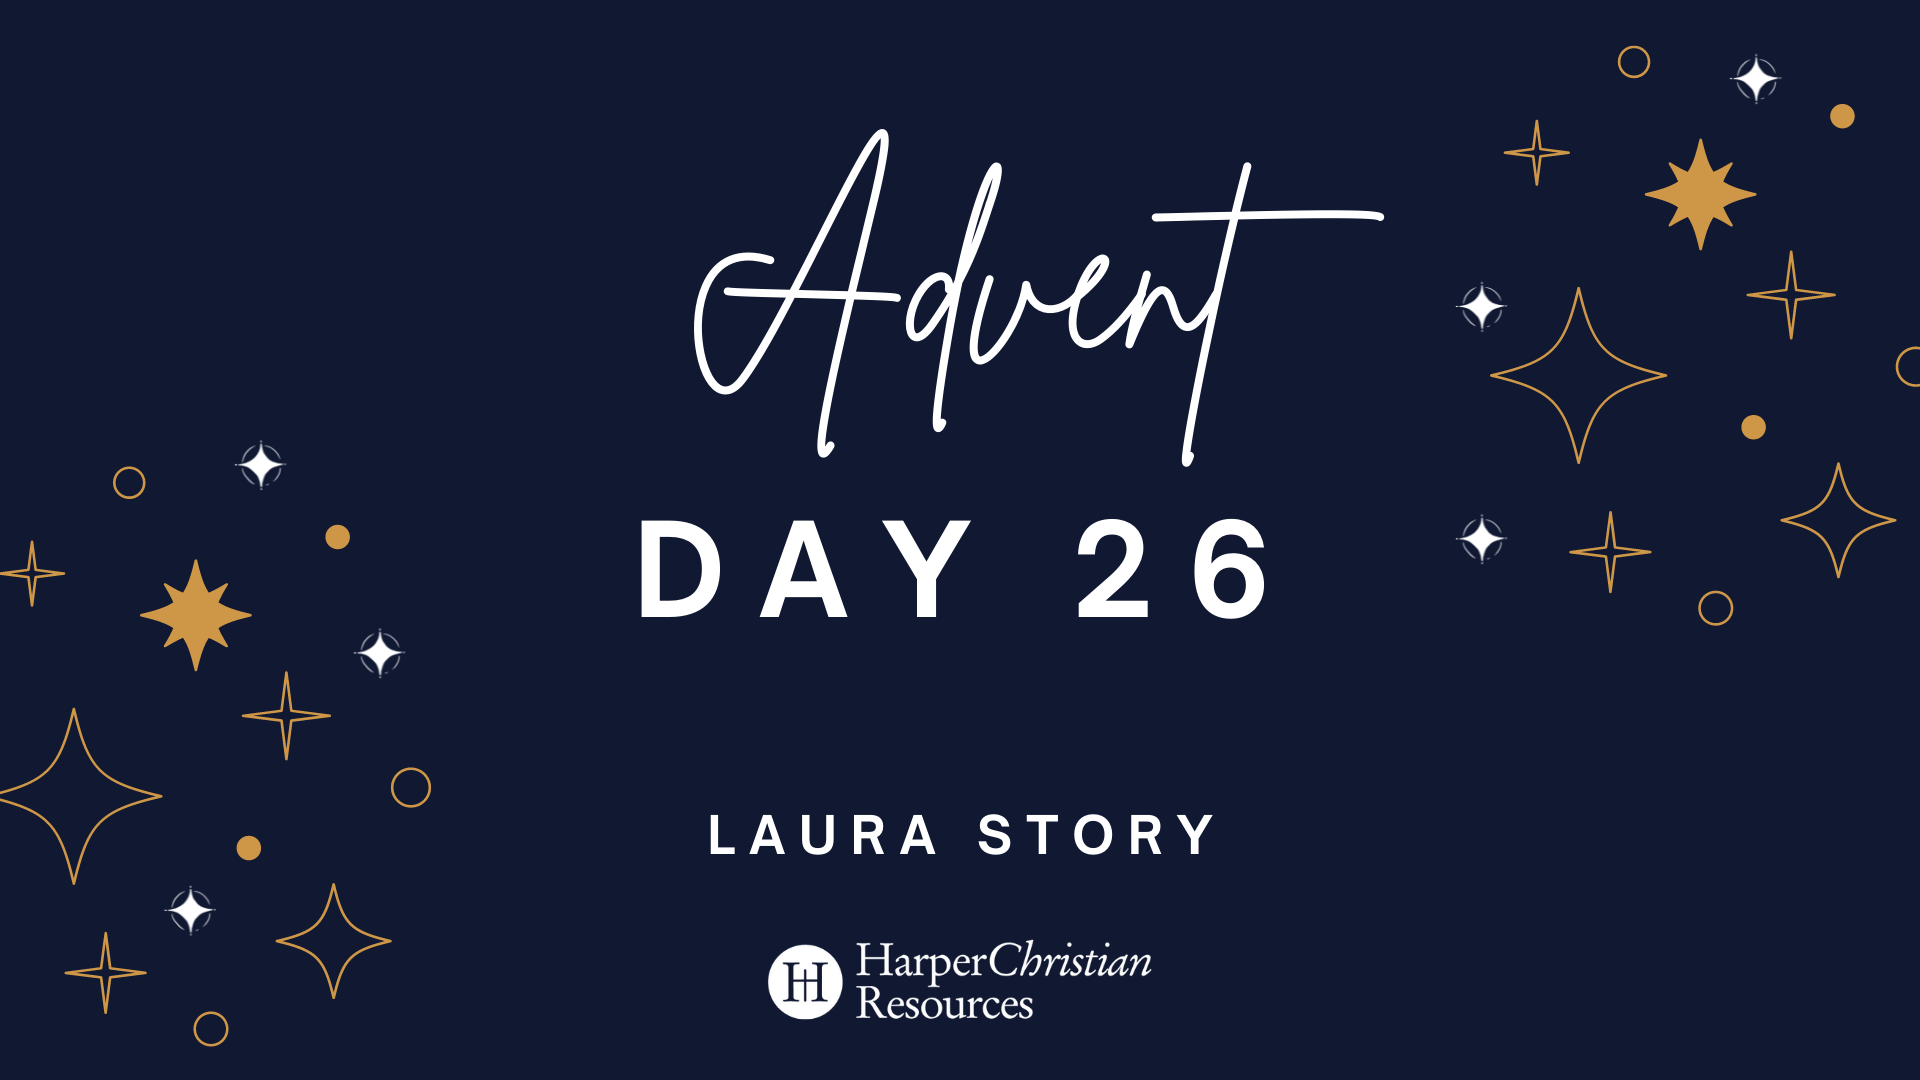 Advent Day 26: A message from Laura Story